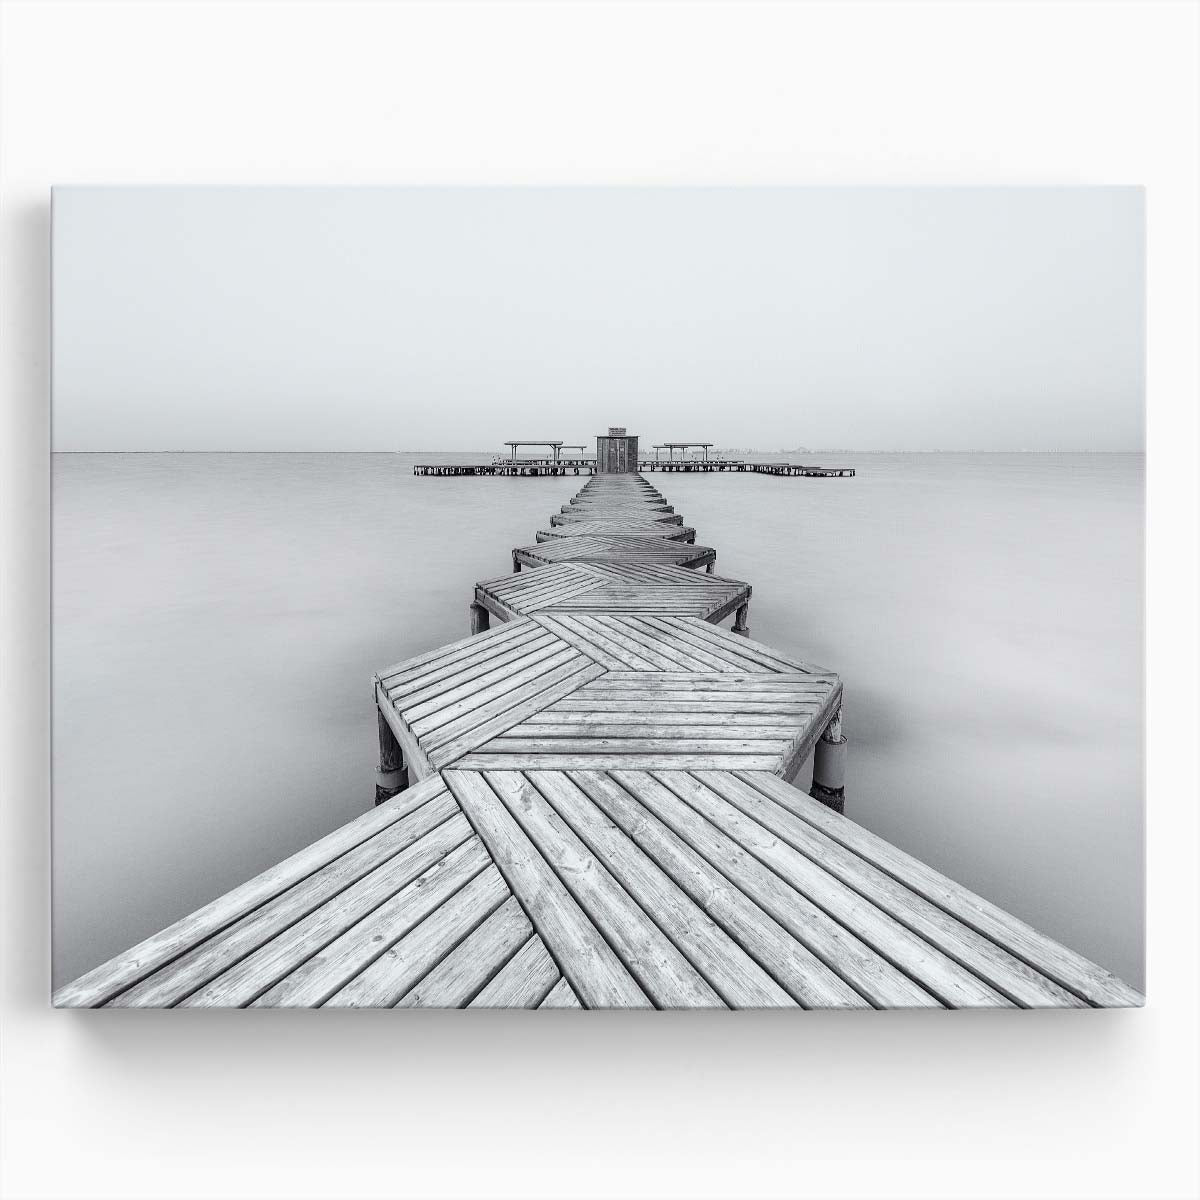 Serene Long Exposure Black and White Pier Photography Wall Art by Luxuriance Designs. Made in USA.